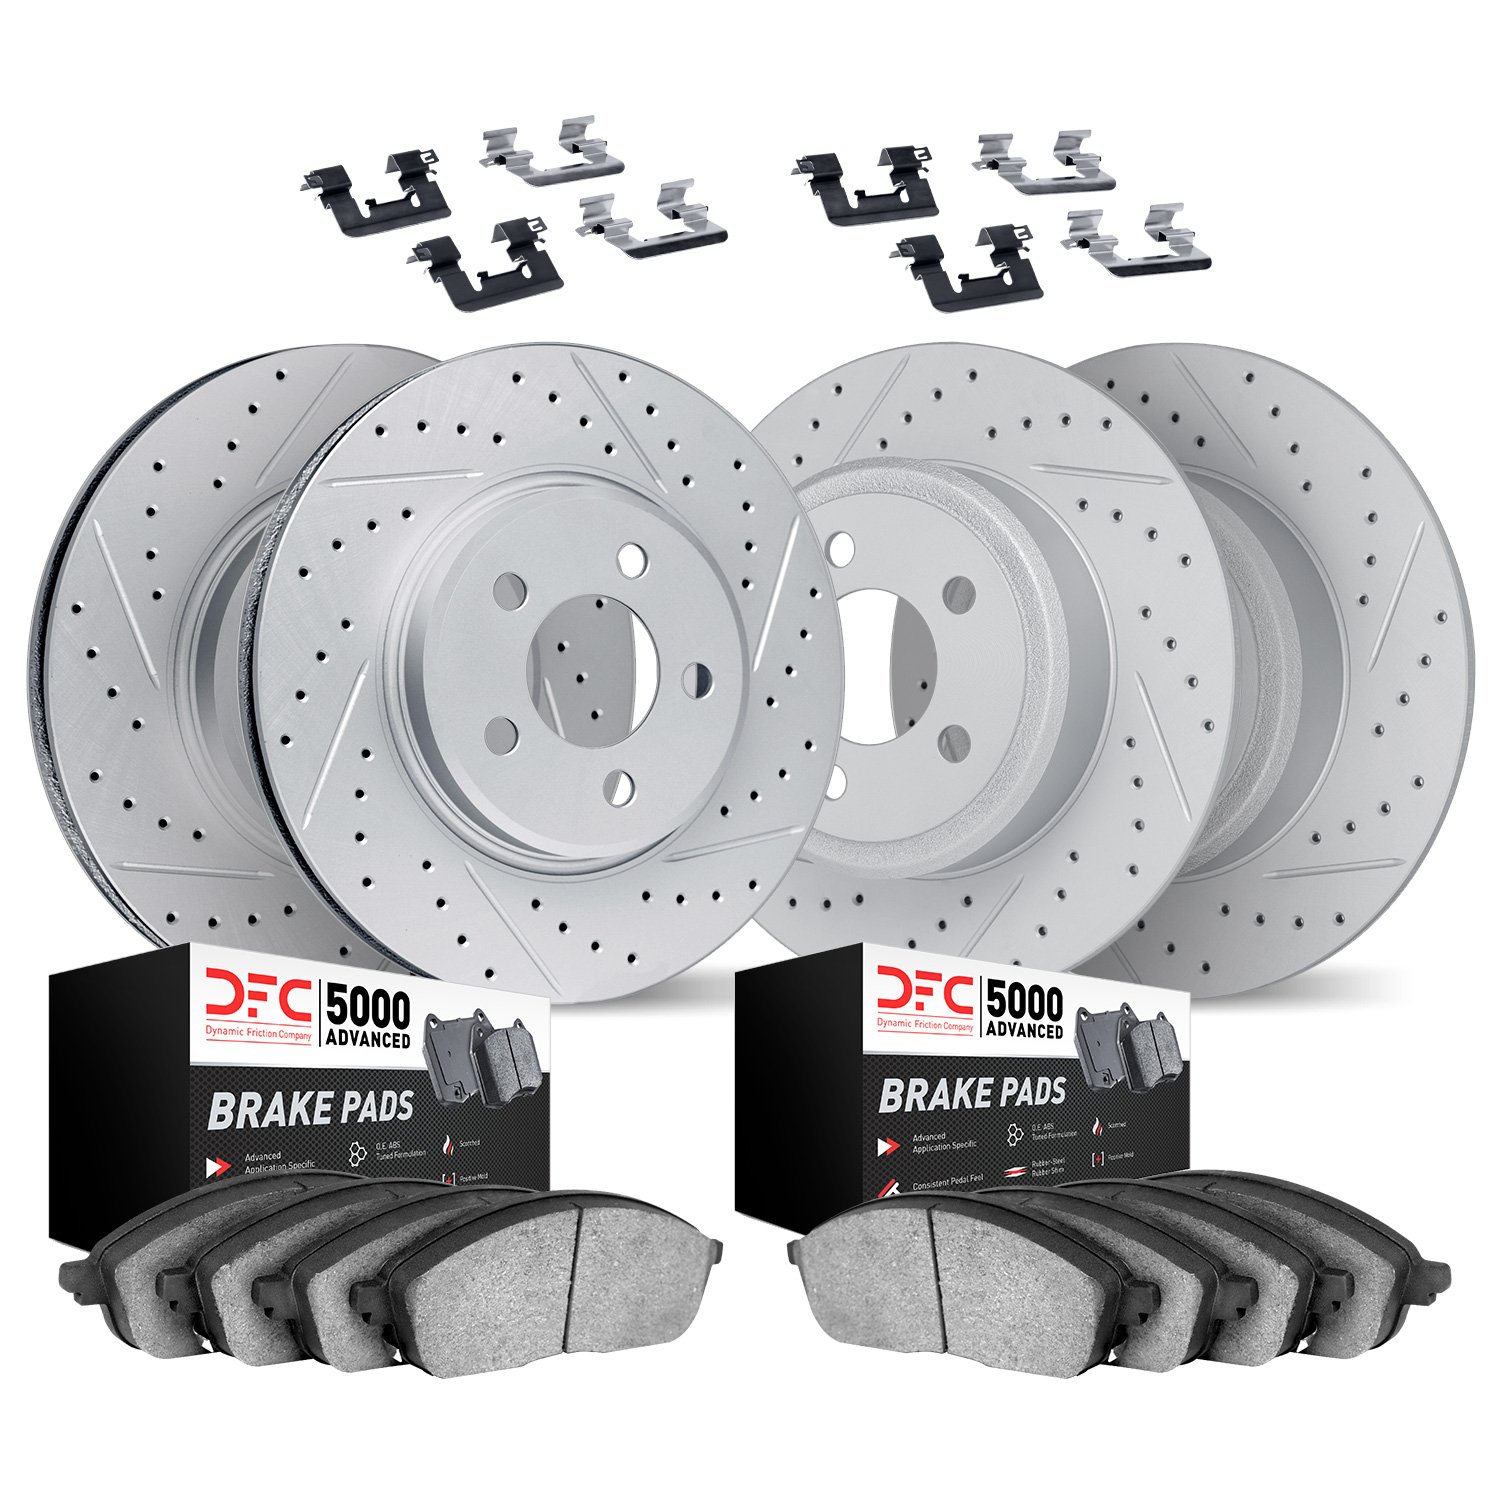 2514-27001 Geoperformance Drilled/Slotted Rotors w/5000 Advanced Brake Pads Kit & Hardware, 1979-1984 Volvo, Position: Front and